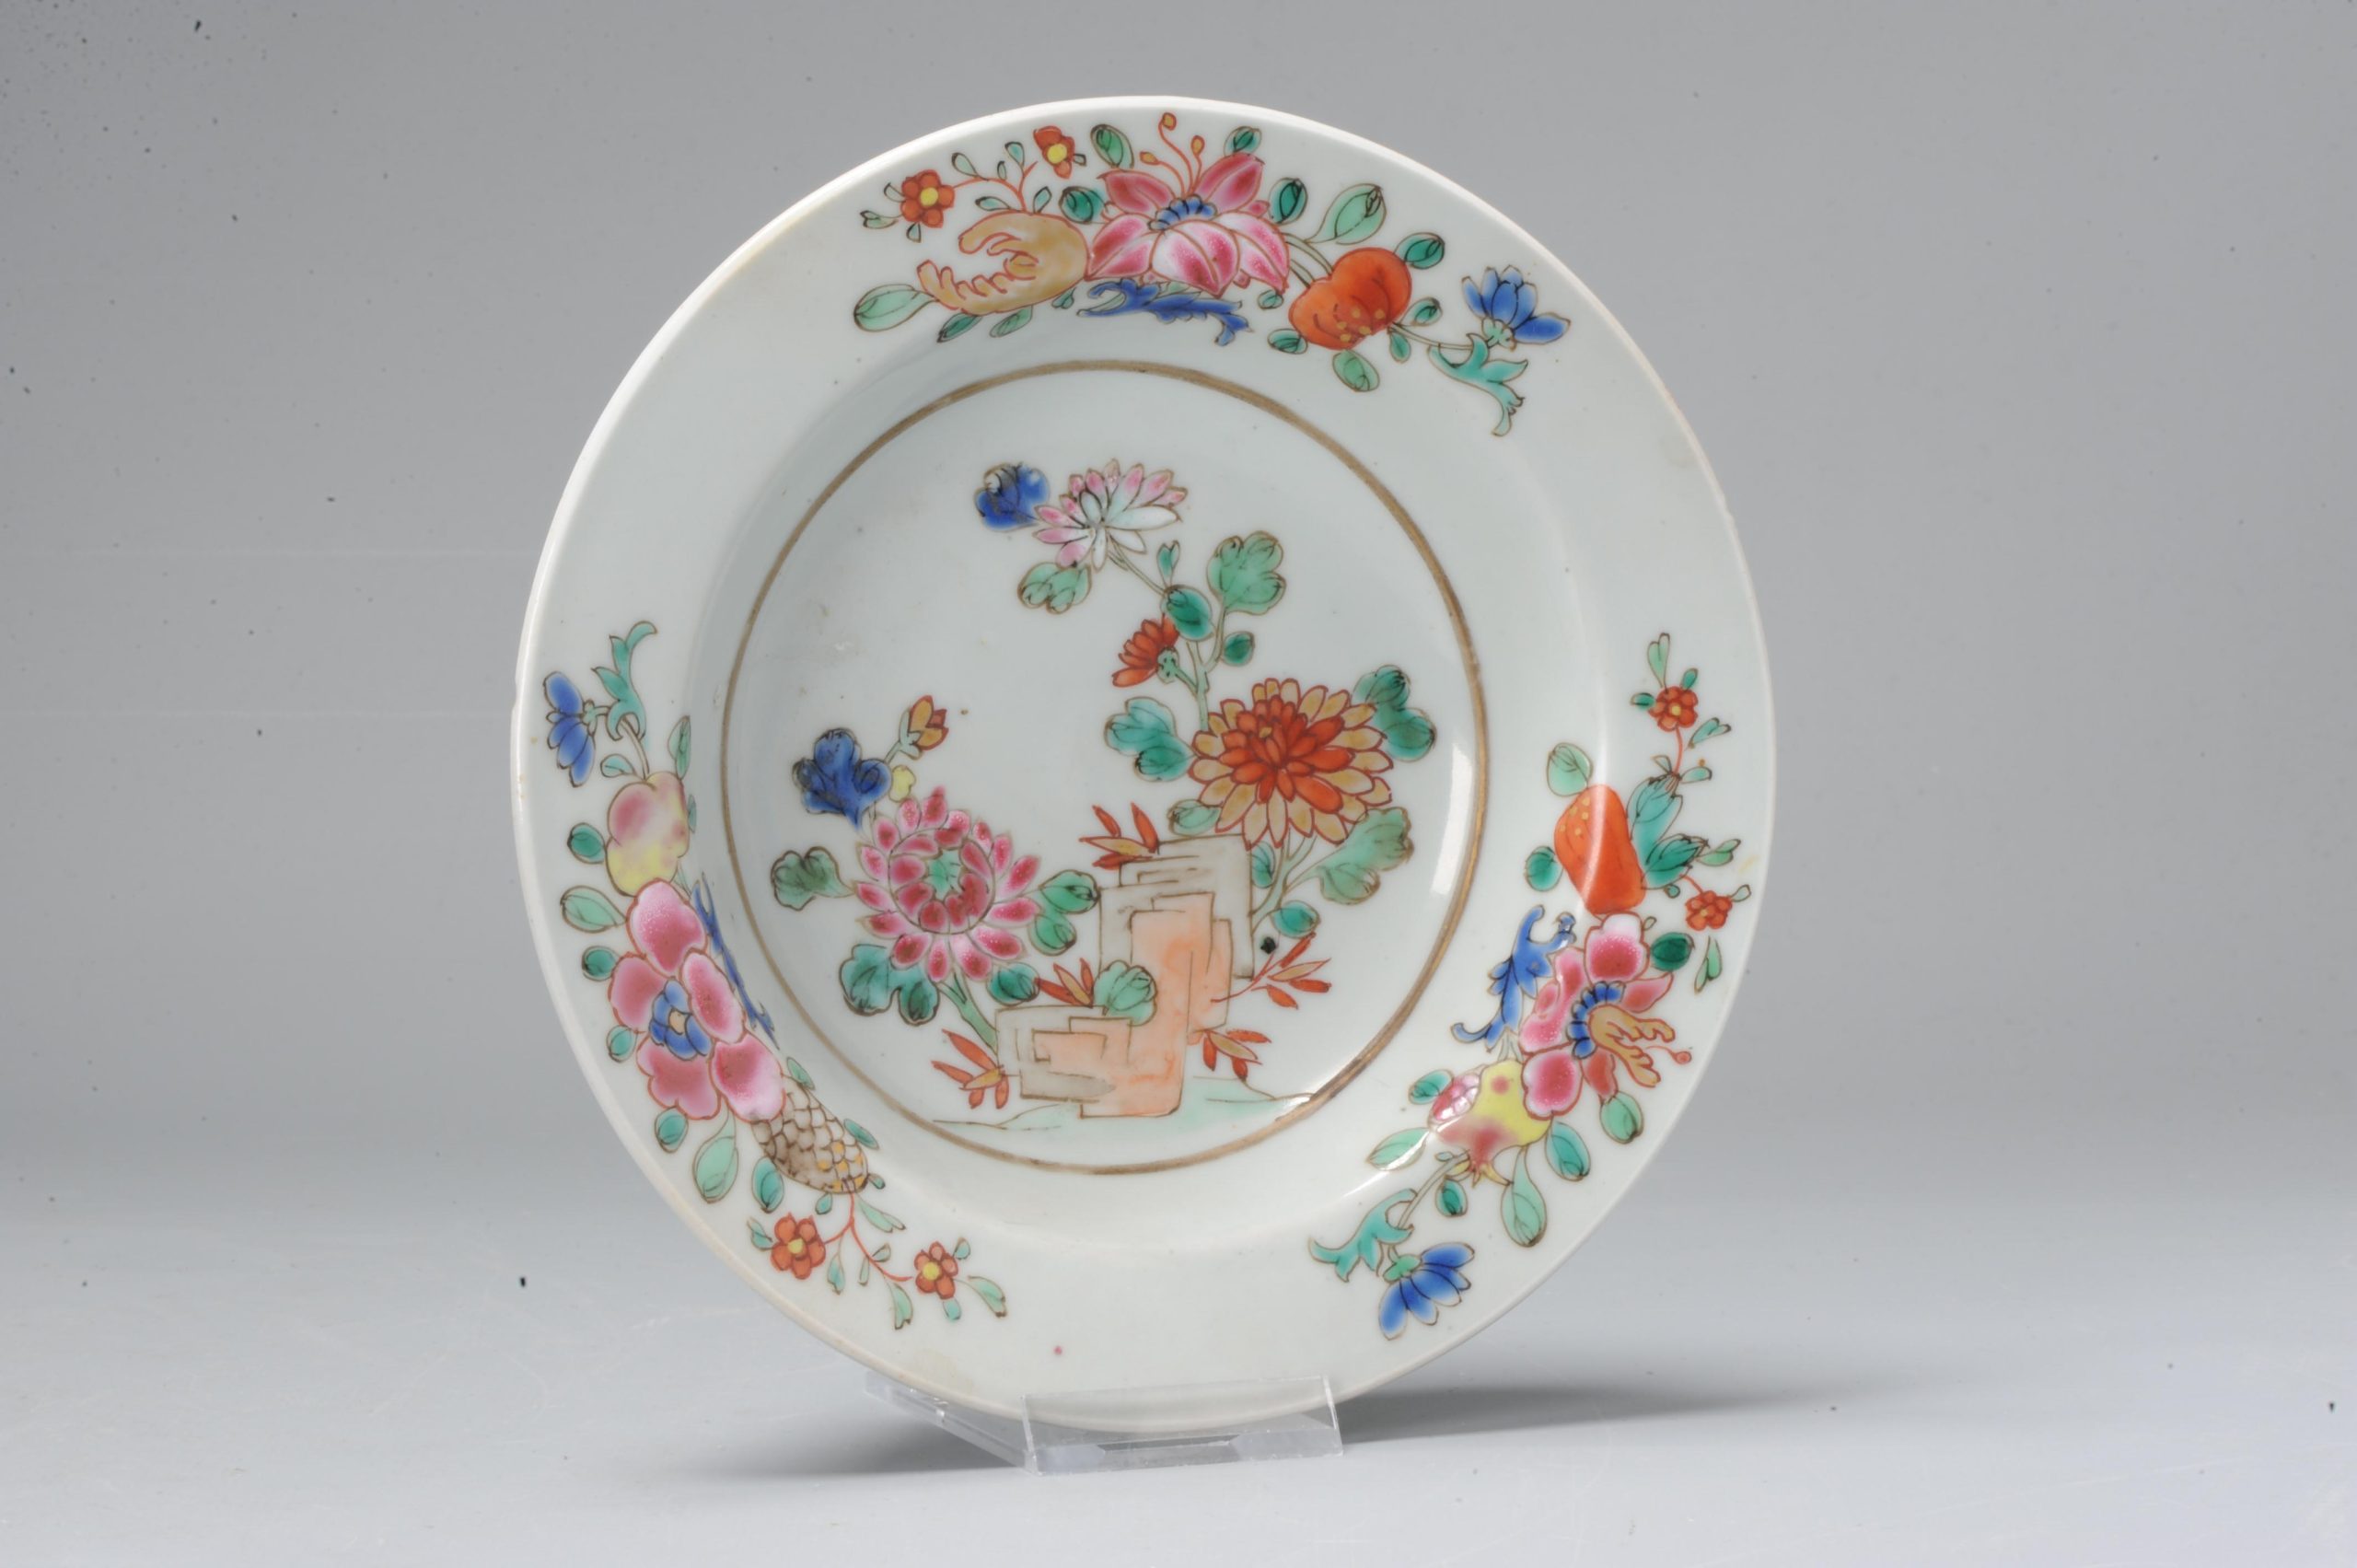 Antique Chinese Porcelain 18C Qing period Dish with Flowers unmarked